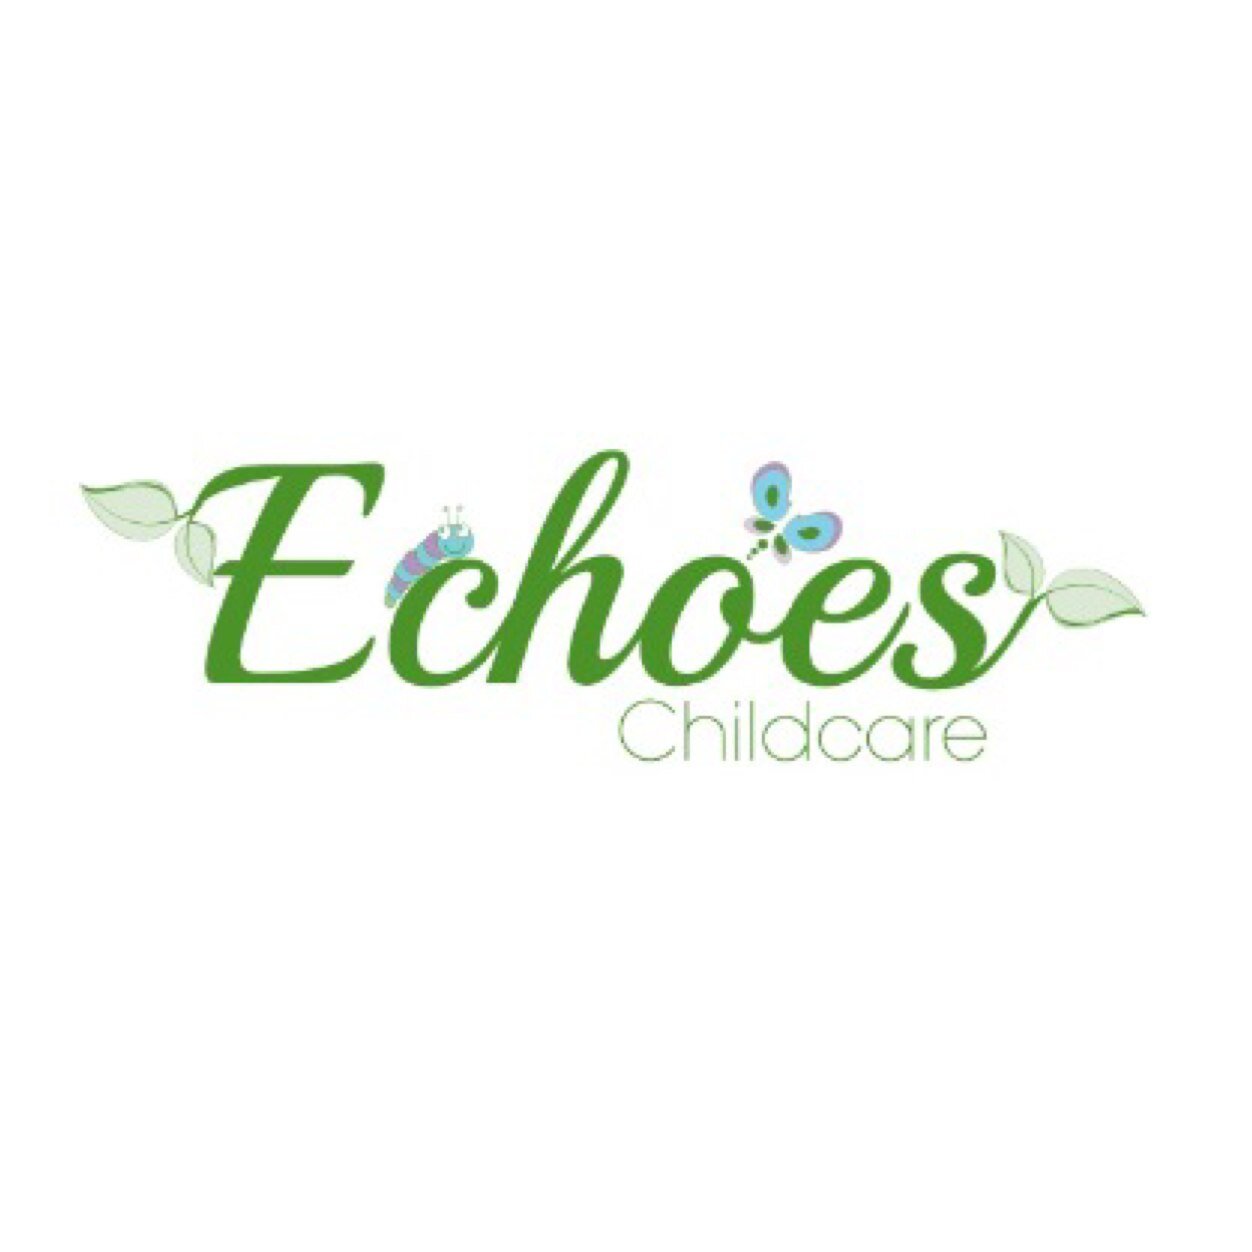 Children's nursery in Exeter, Devon. Follow us for updates and find us on Facebook - Echoes Childcare :)